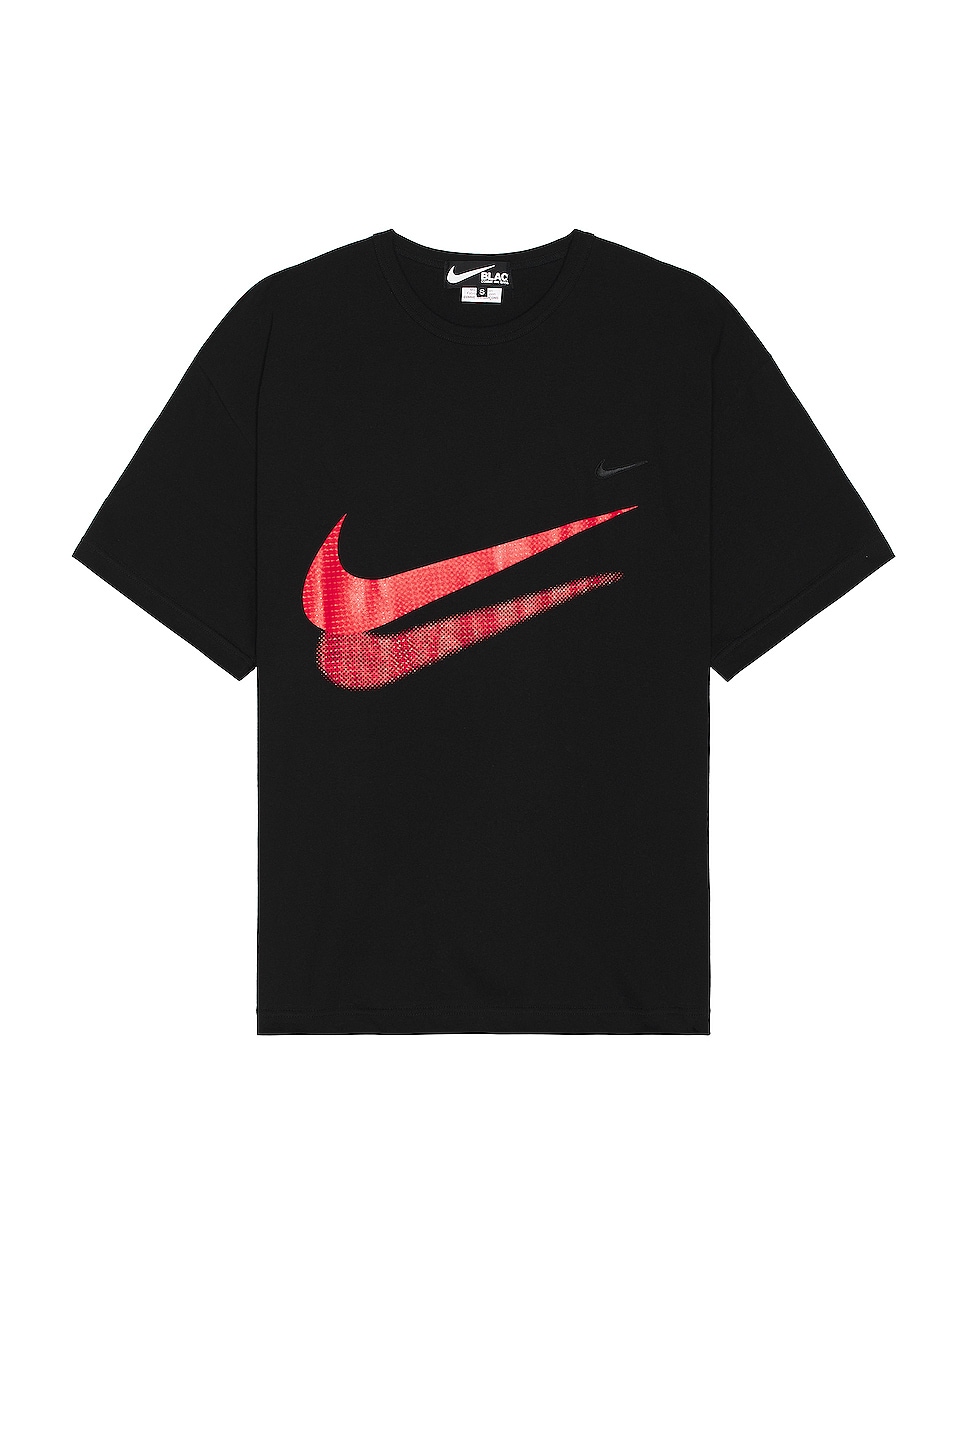 Image 1 of COMME des GARCONS BLACK X Nike Tee in Black